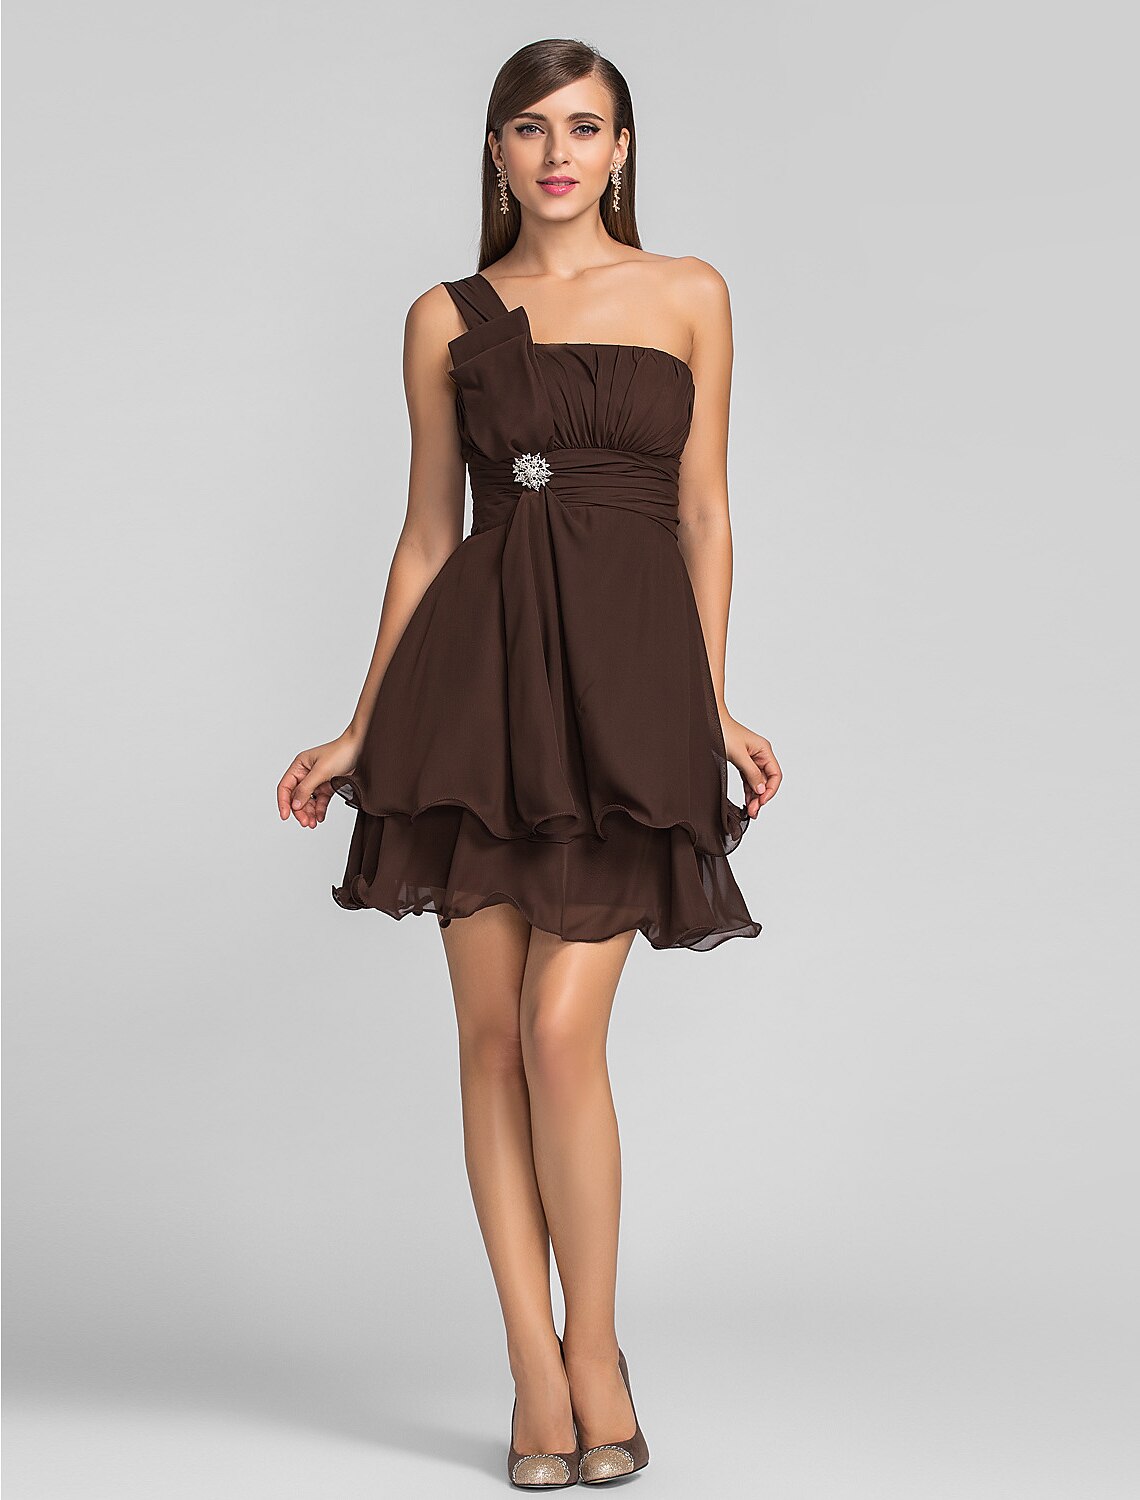 A-Line Minimalist Cute Dress Homecoming Cocktail Party Short / Mini One Shoulder Sleeveless Chiffon with Ruched Draping Crystal Brooch